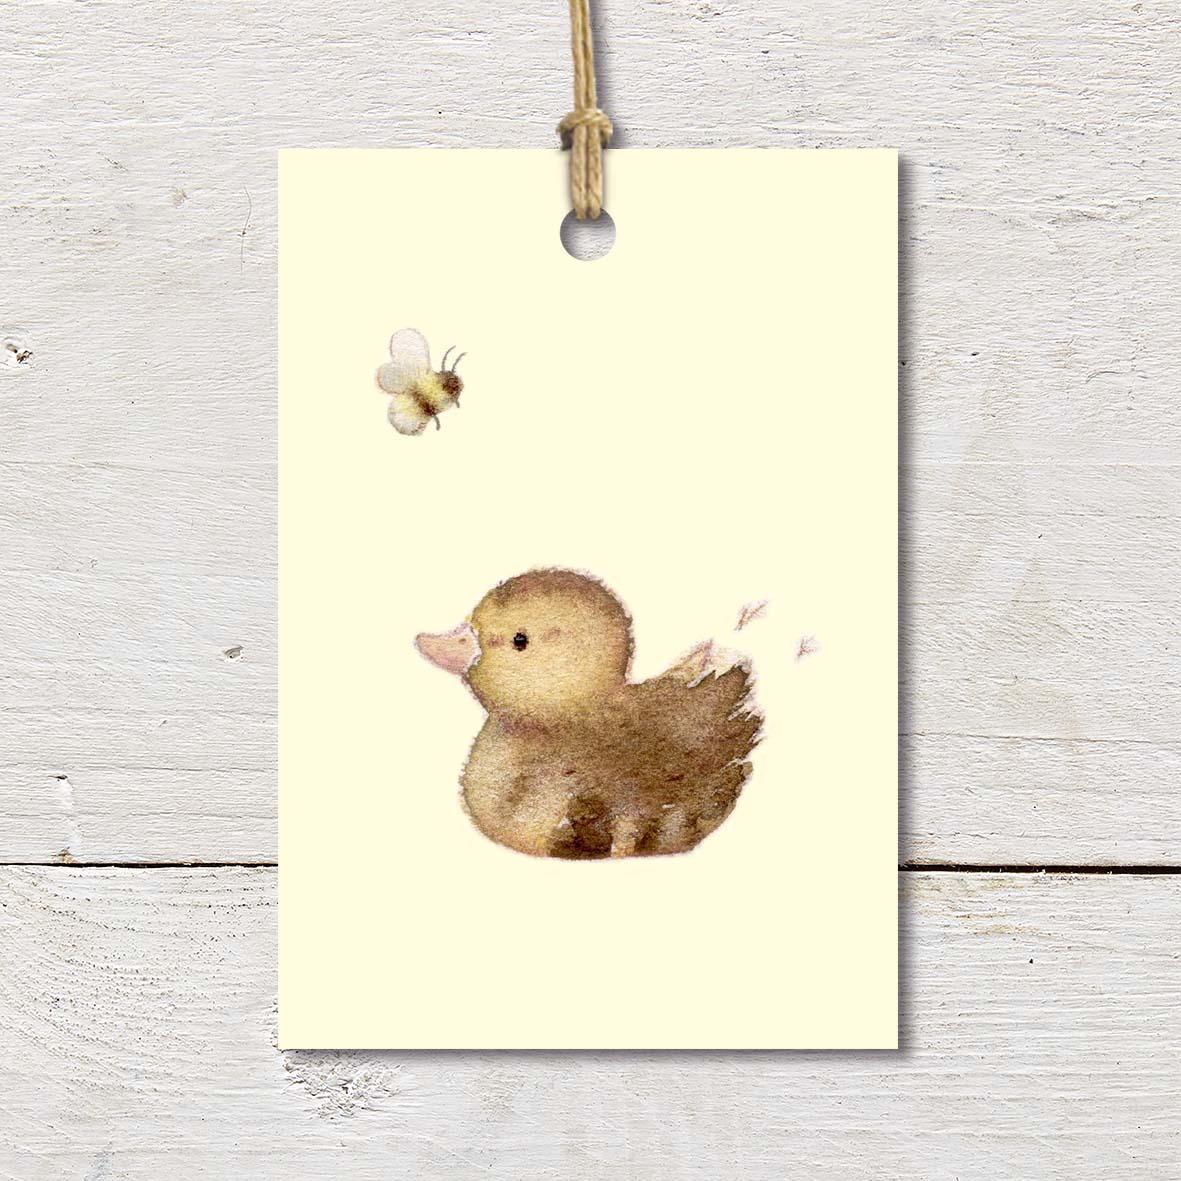 Gift Tag featuring a cute duckling on a pale yellow background.